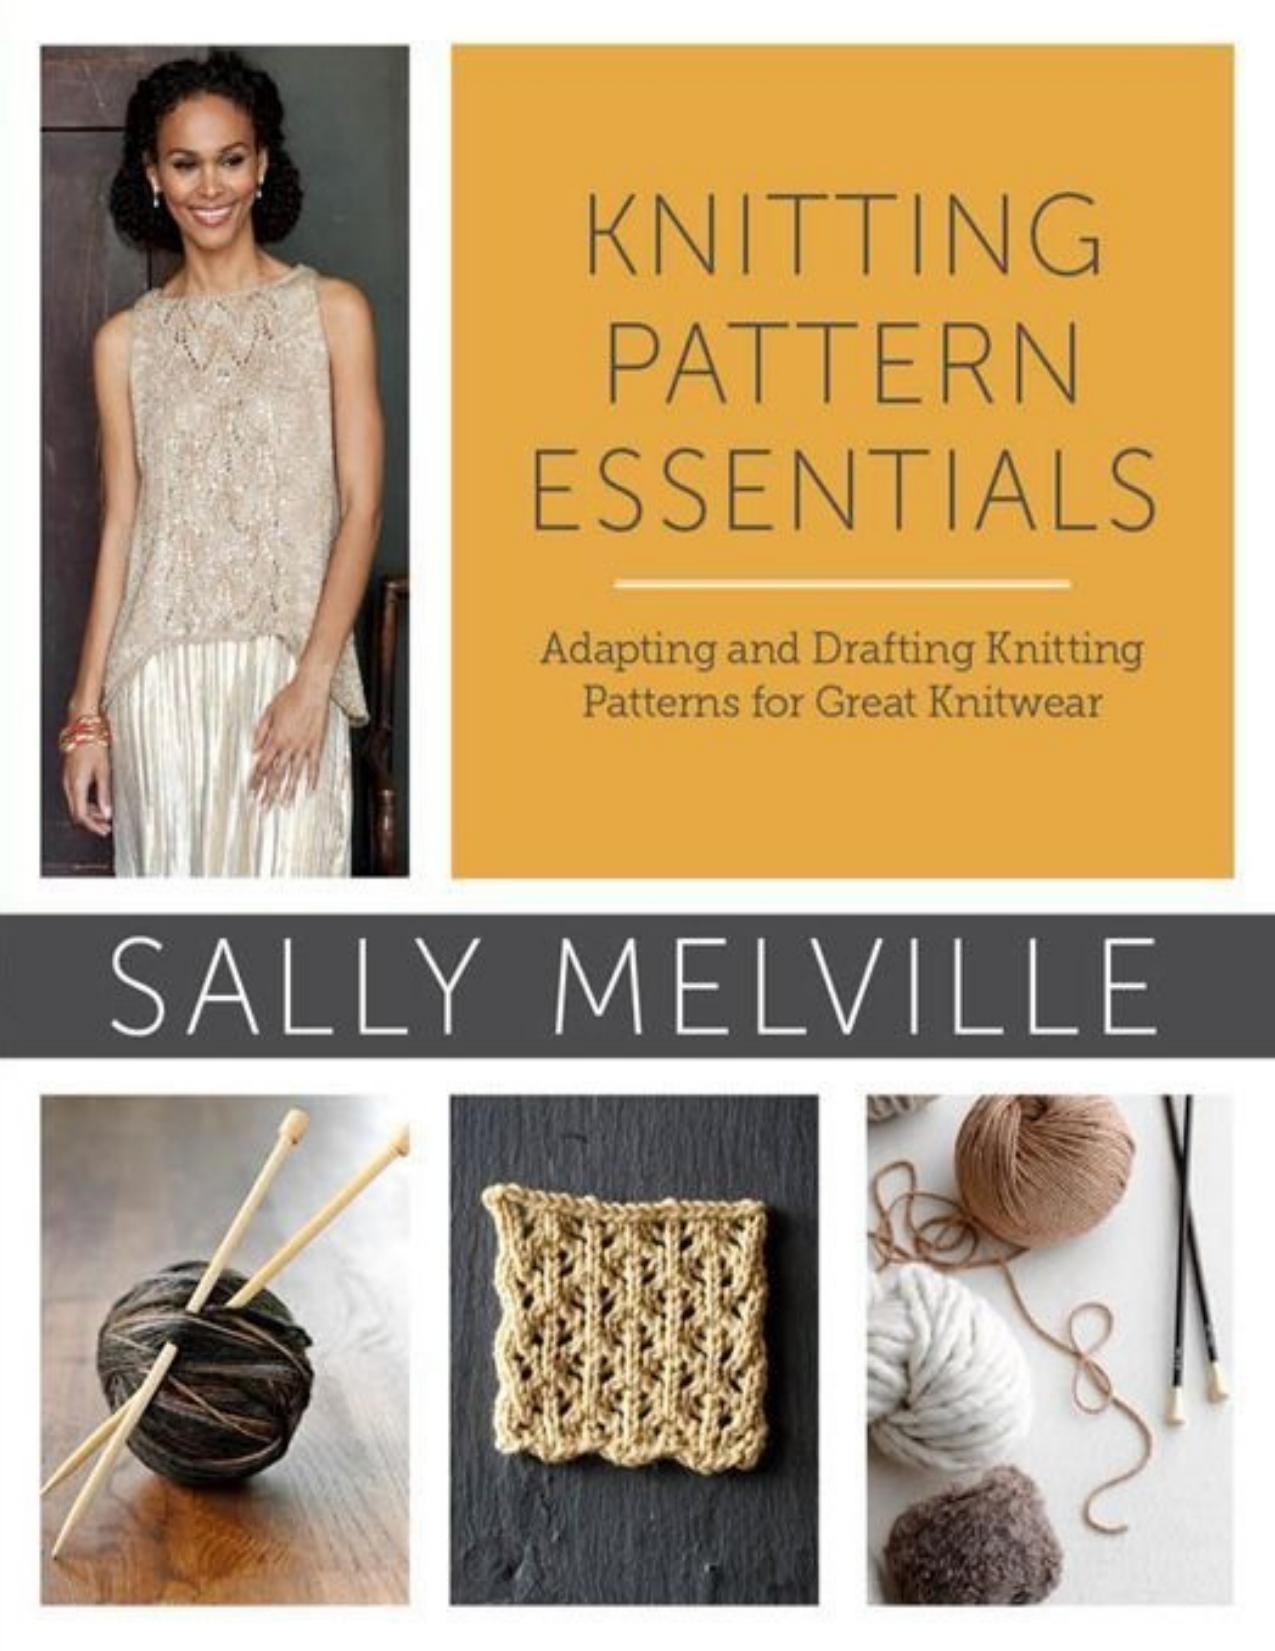 Knitting Pattern Essentials: Adapting and Drafting Knitting Patterns for Great Knitwear - PDFDrive.com